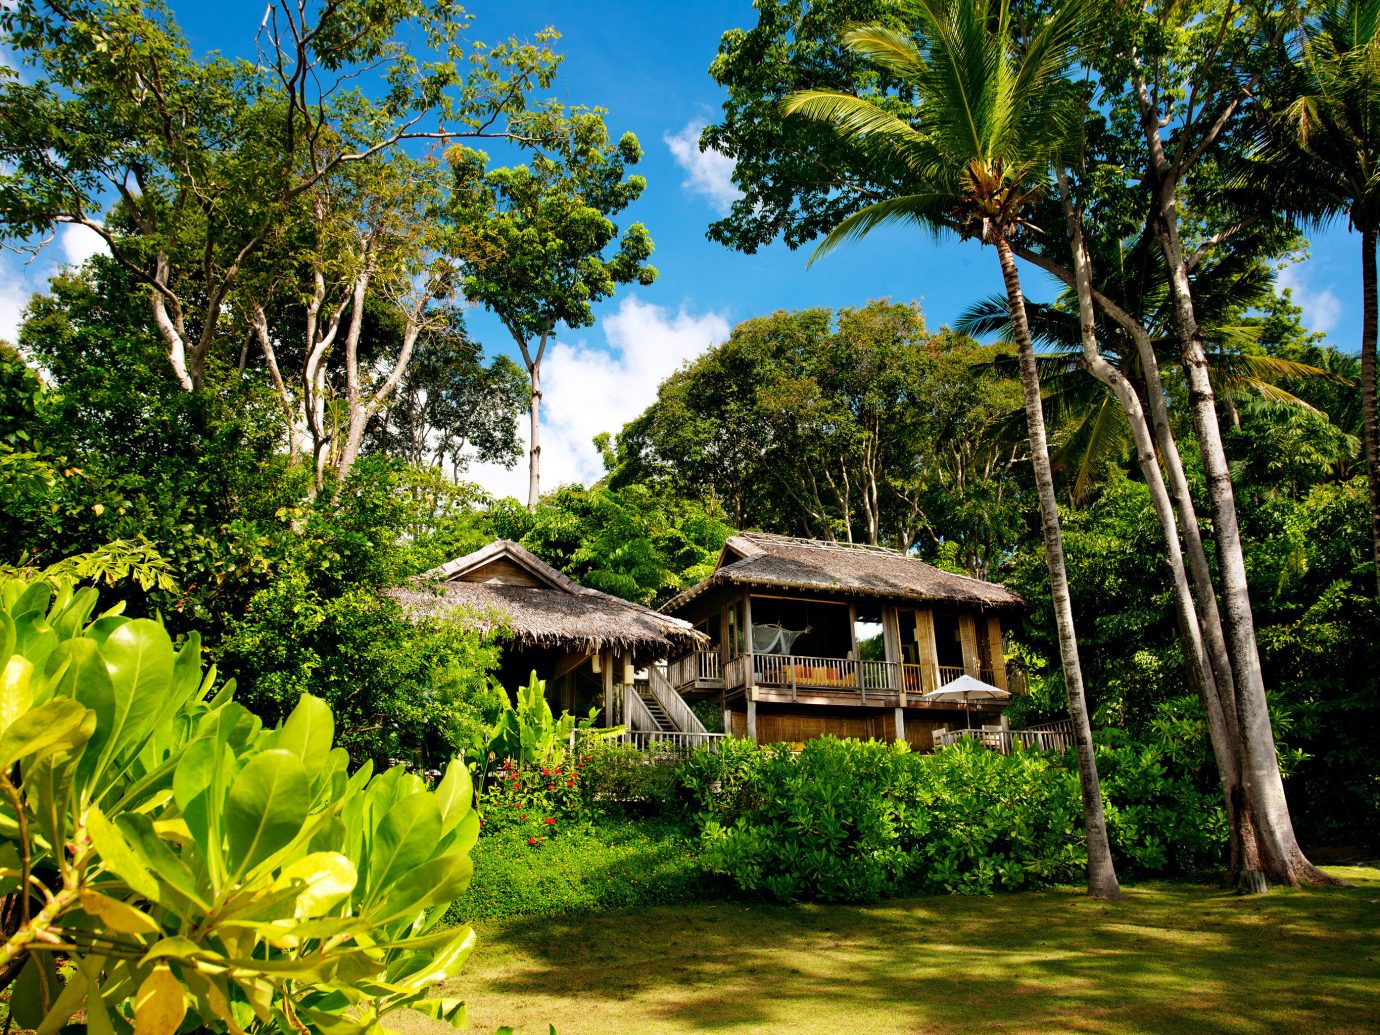 Beach Exterior Garden Grounds Hotels Phuket Thailand Tropical tree outdoor habitat natural environment plant botany house estate Jungle Forest tropics arecales woody plant rainforest rural area Resort flower plantation surrounded